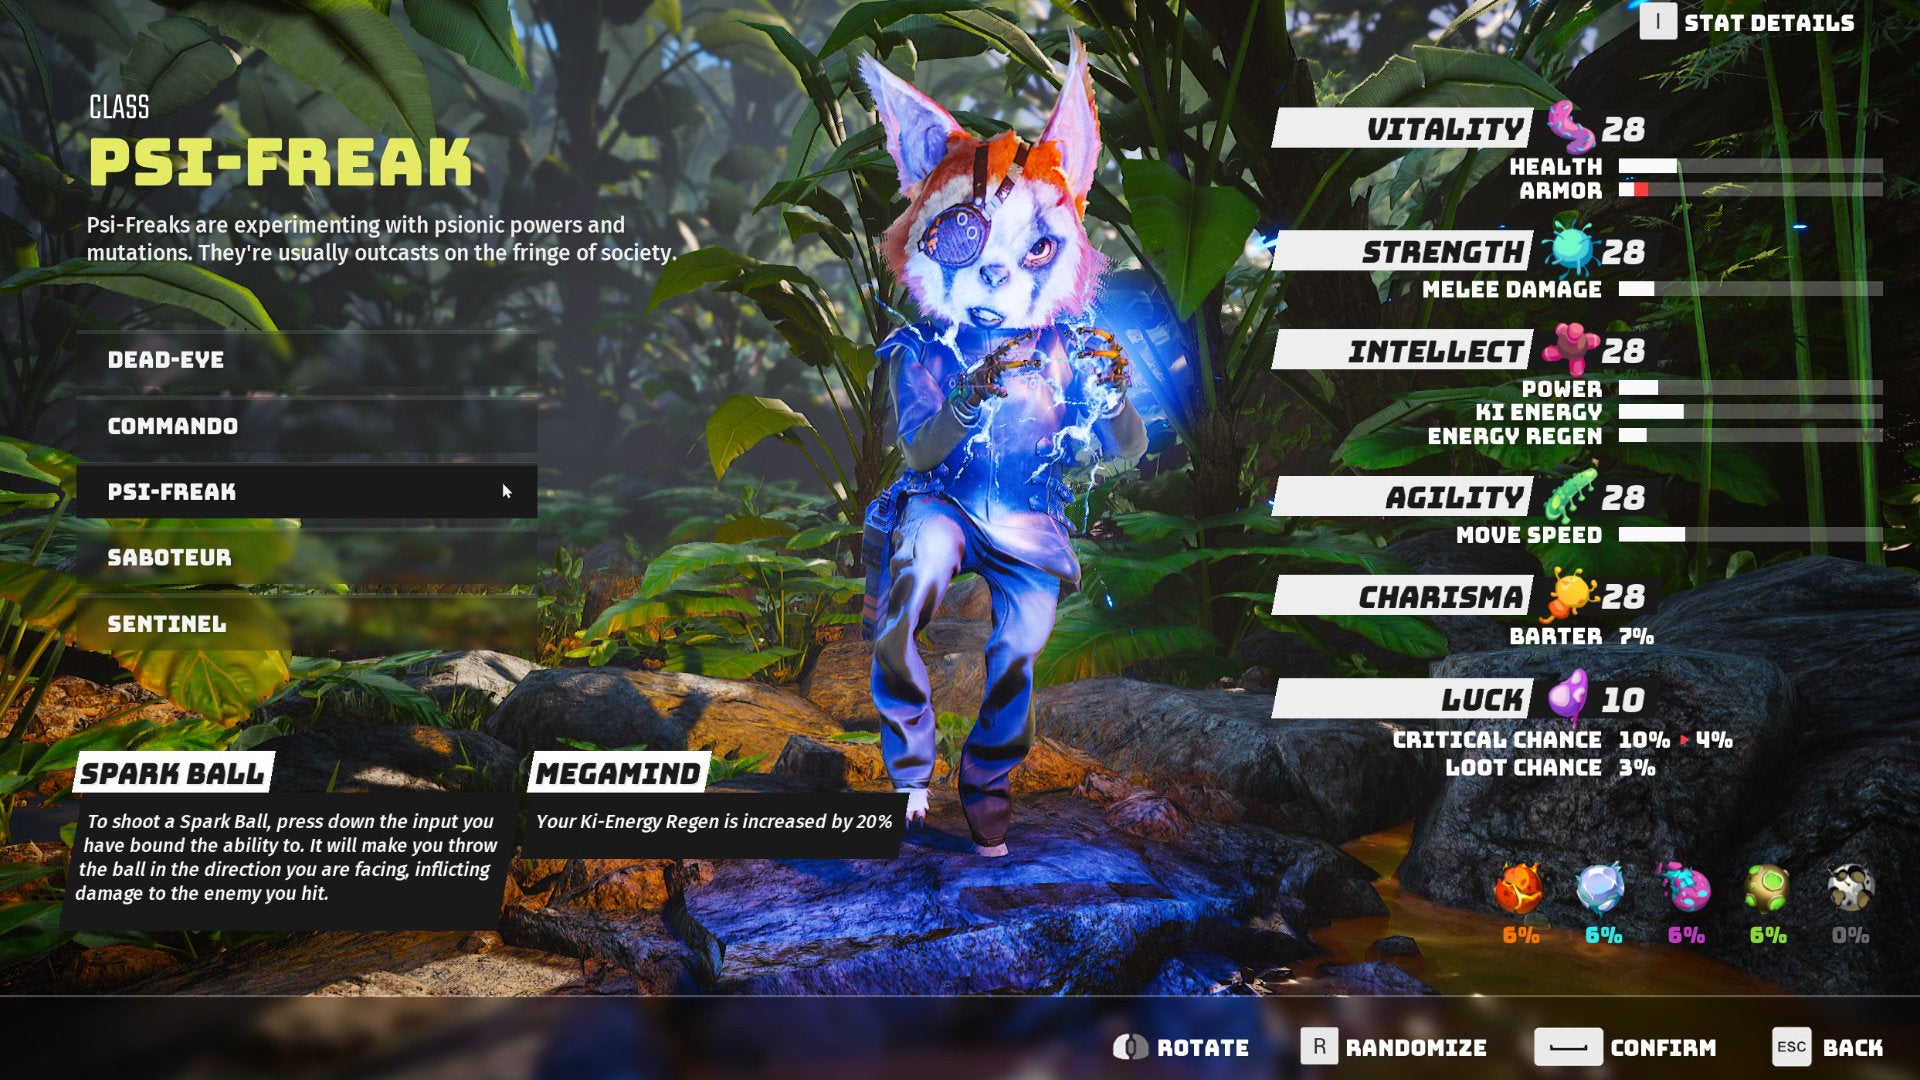 A Biomutant screenshot of the character creation and class selection screen, with the Psi Freak class selected.